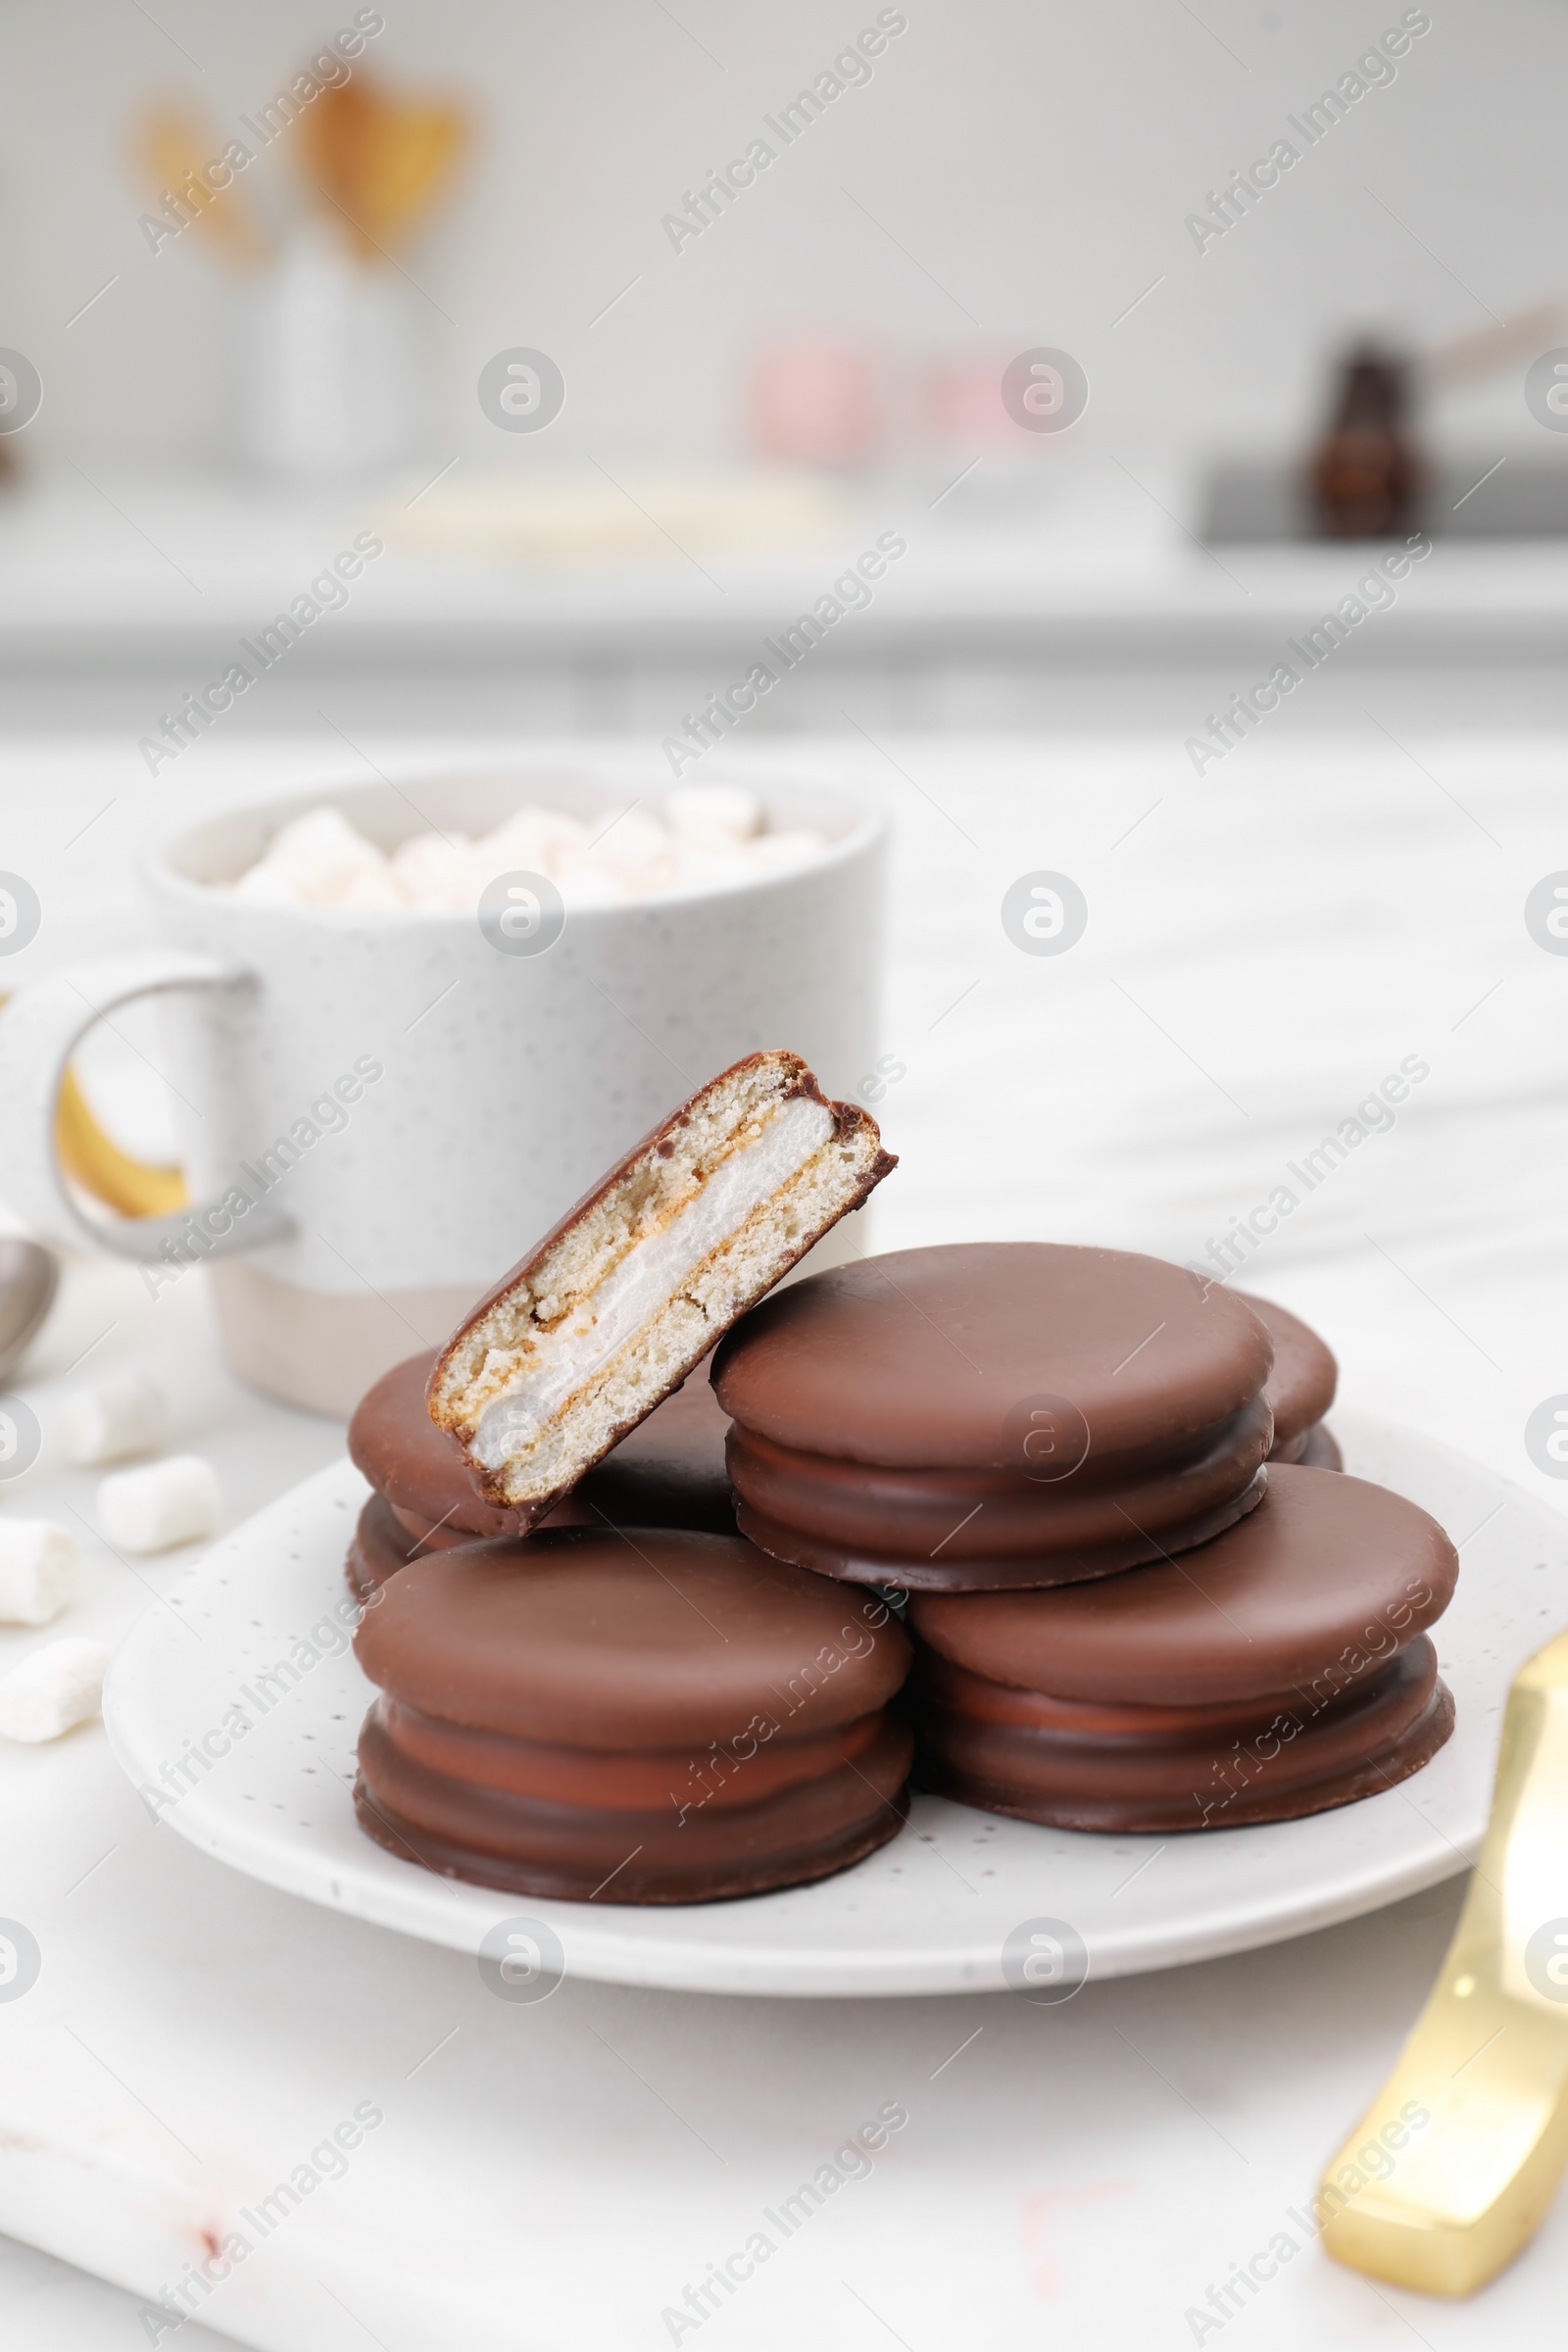 Photo of Saucer with delicious choco pies and cup of drink on white table in kitchen